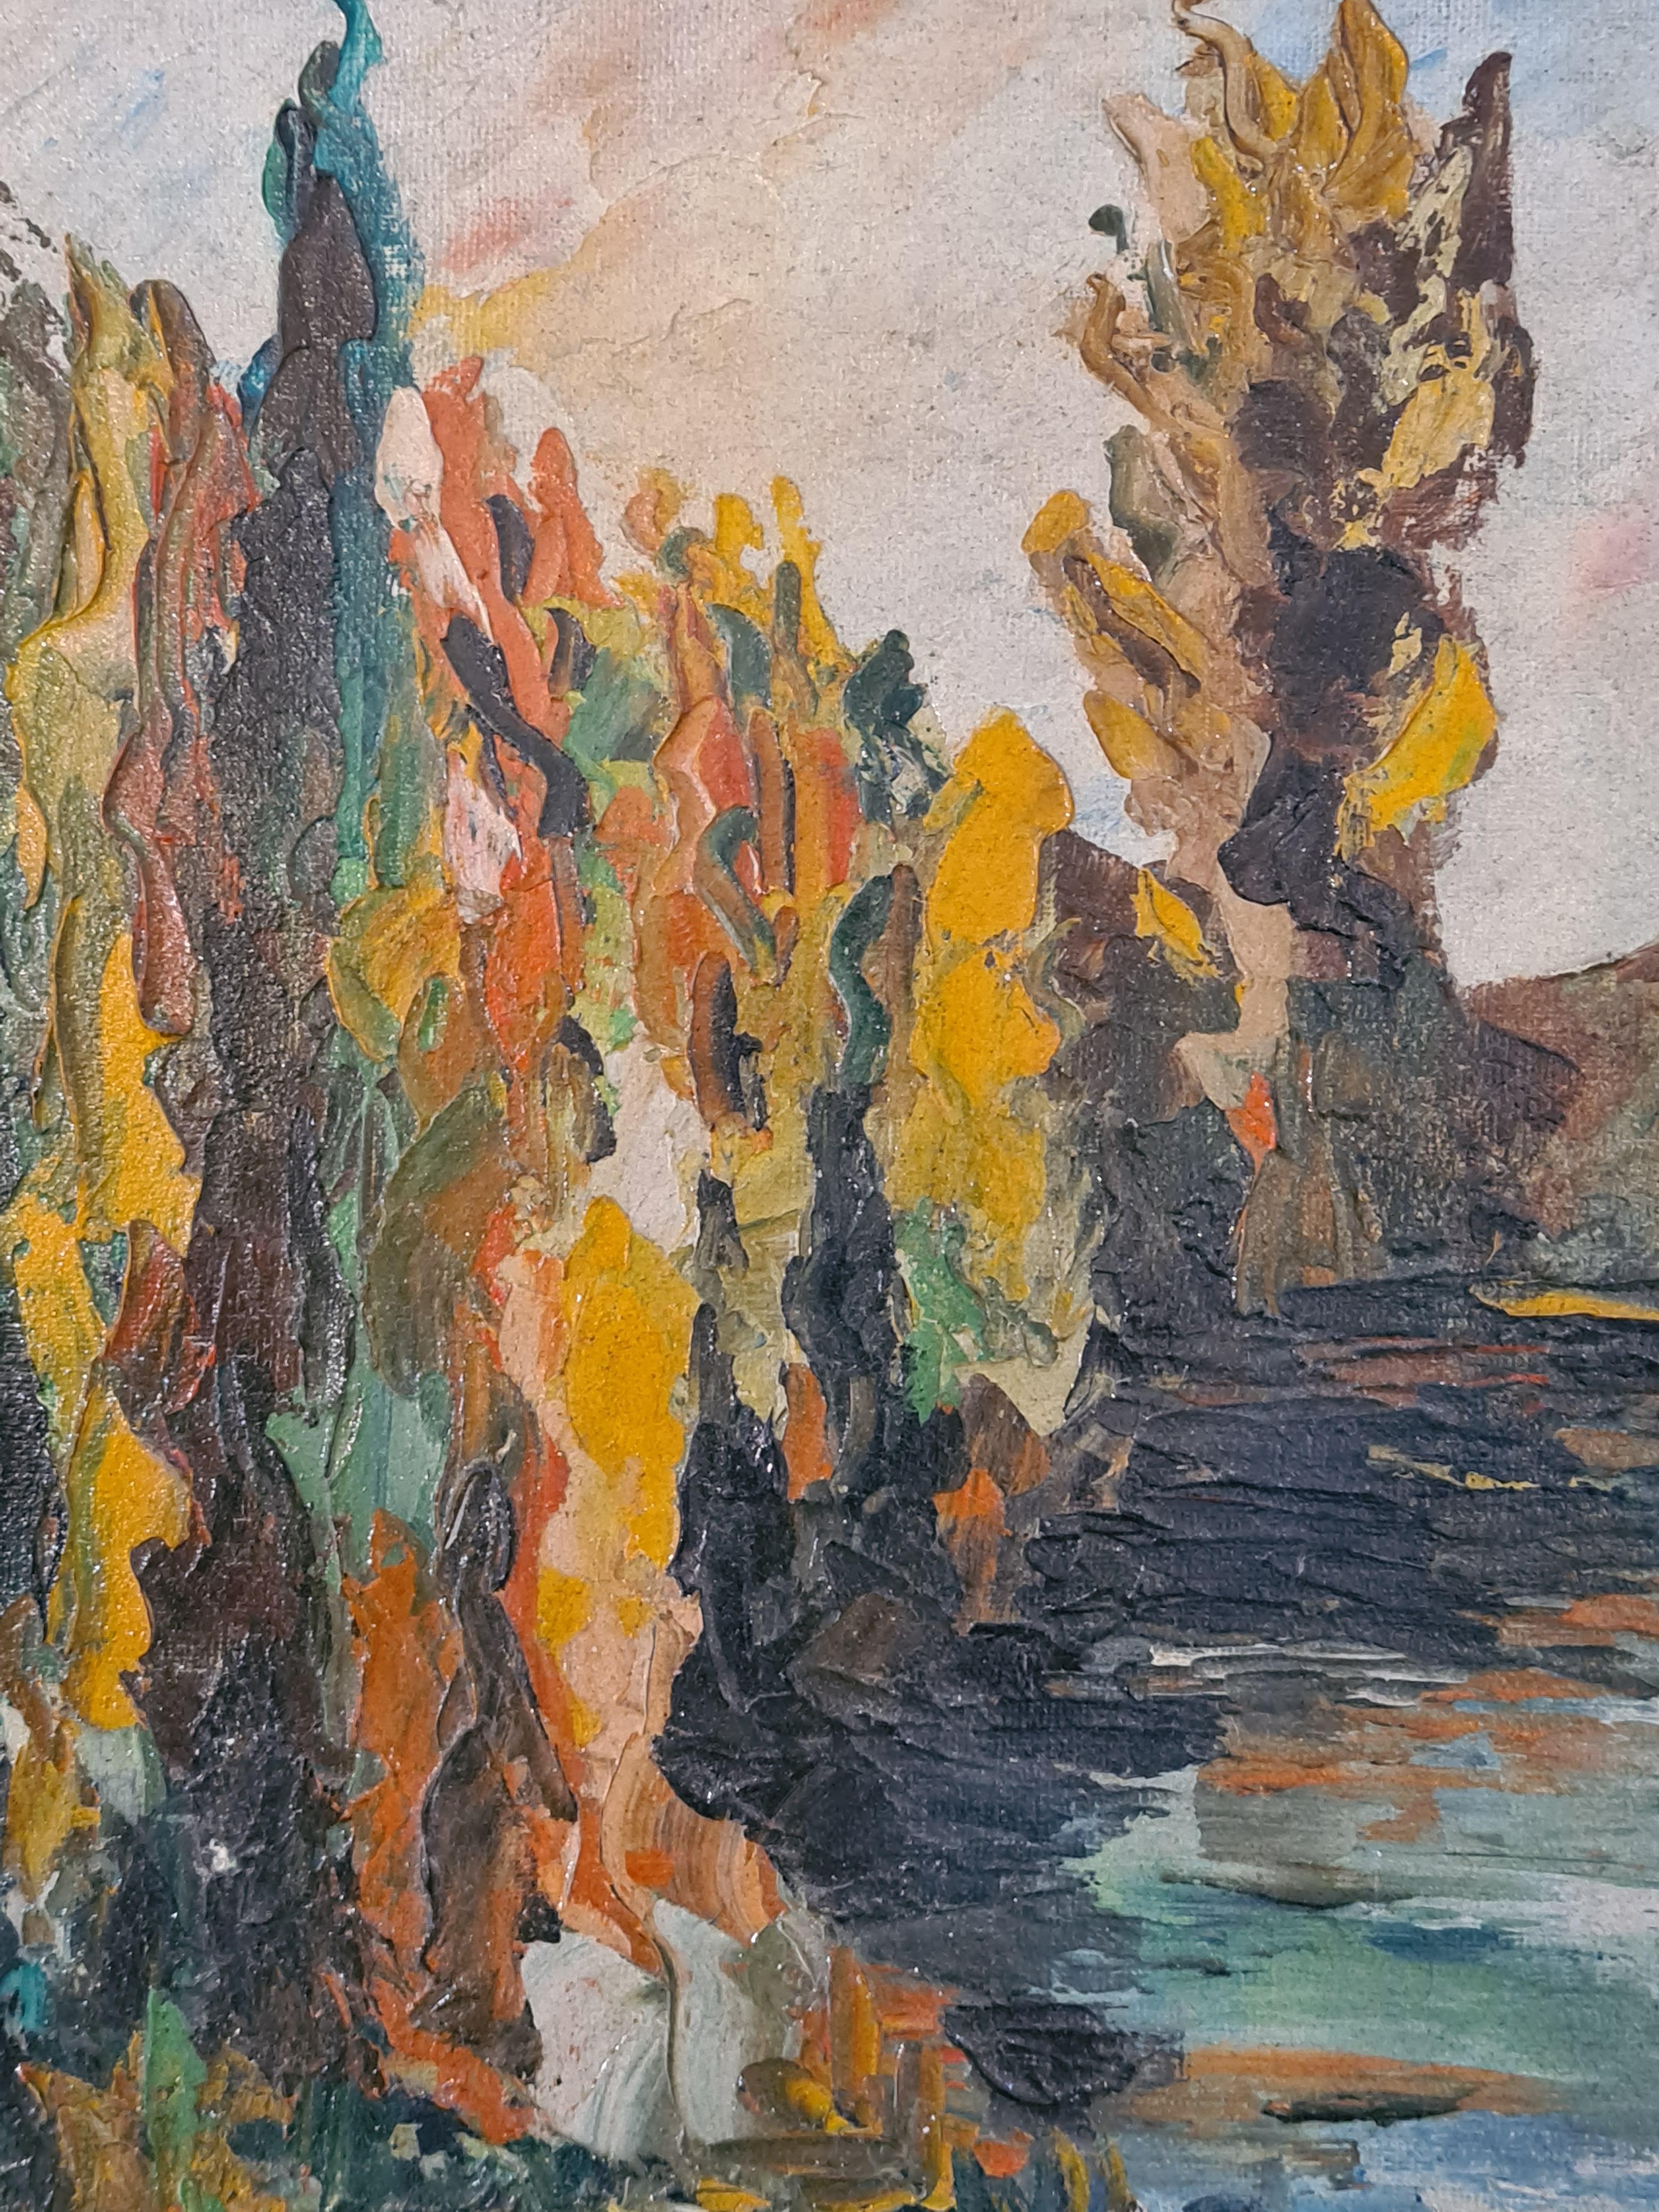 Mid-Century impressionist oil on board by Italian artist J. Torrelli.

This painting of a lakeside at dusk, reminiscent of the 'Barbizon School', showcases impressionist painting techniques where a myriad of colours and brushstrokes intermingle to